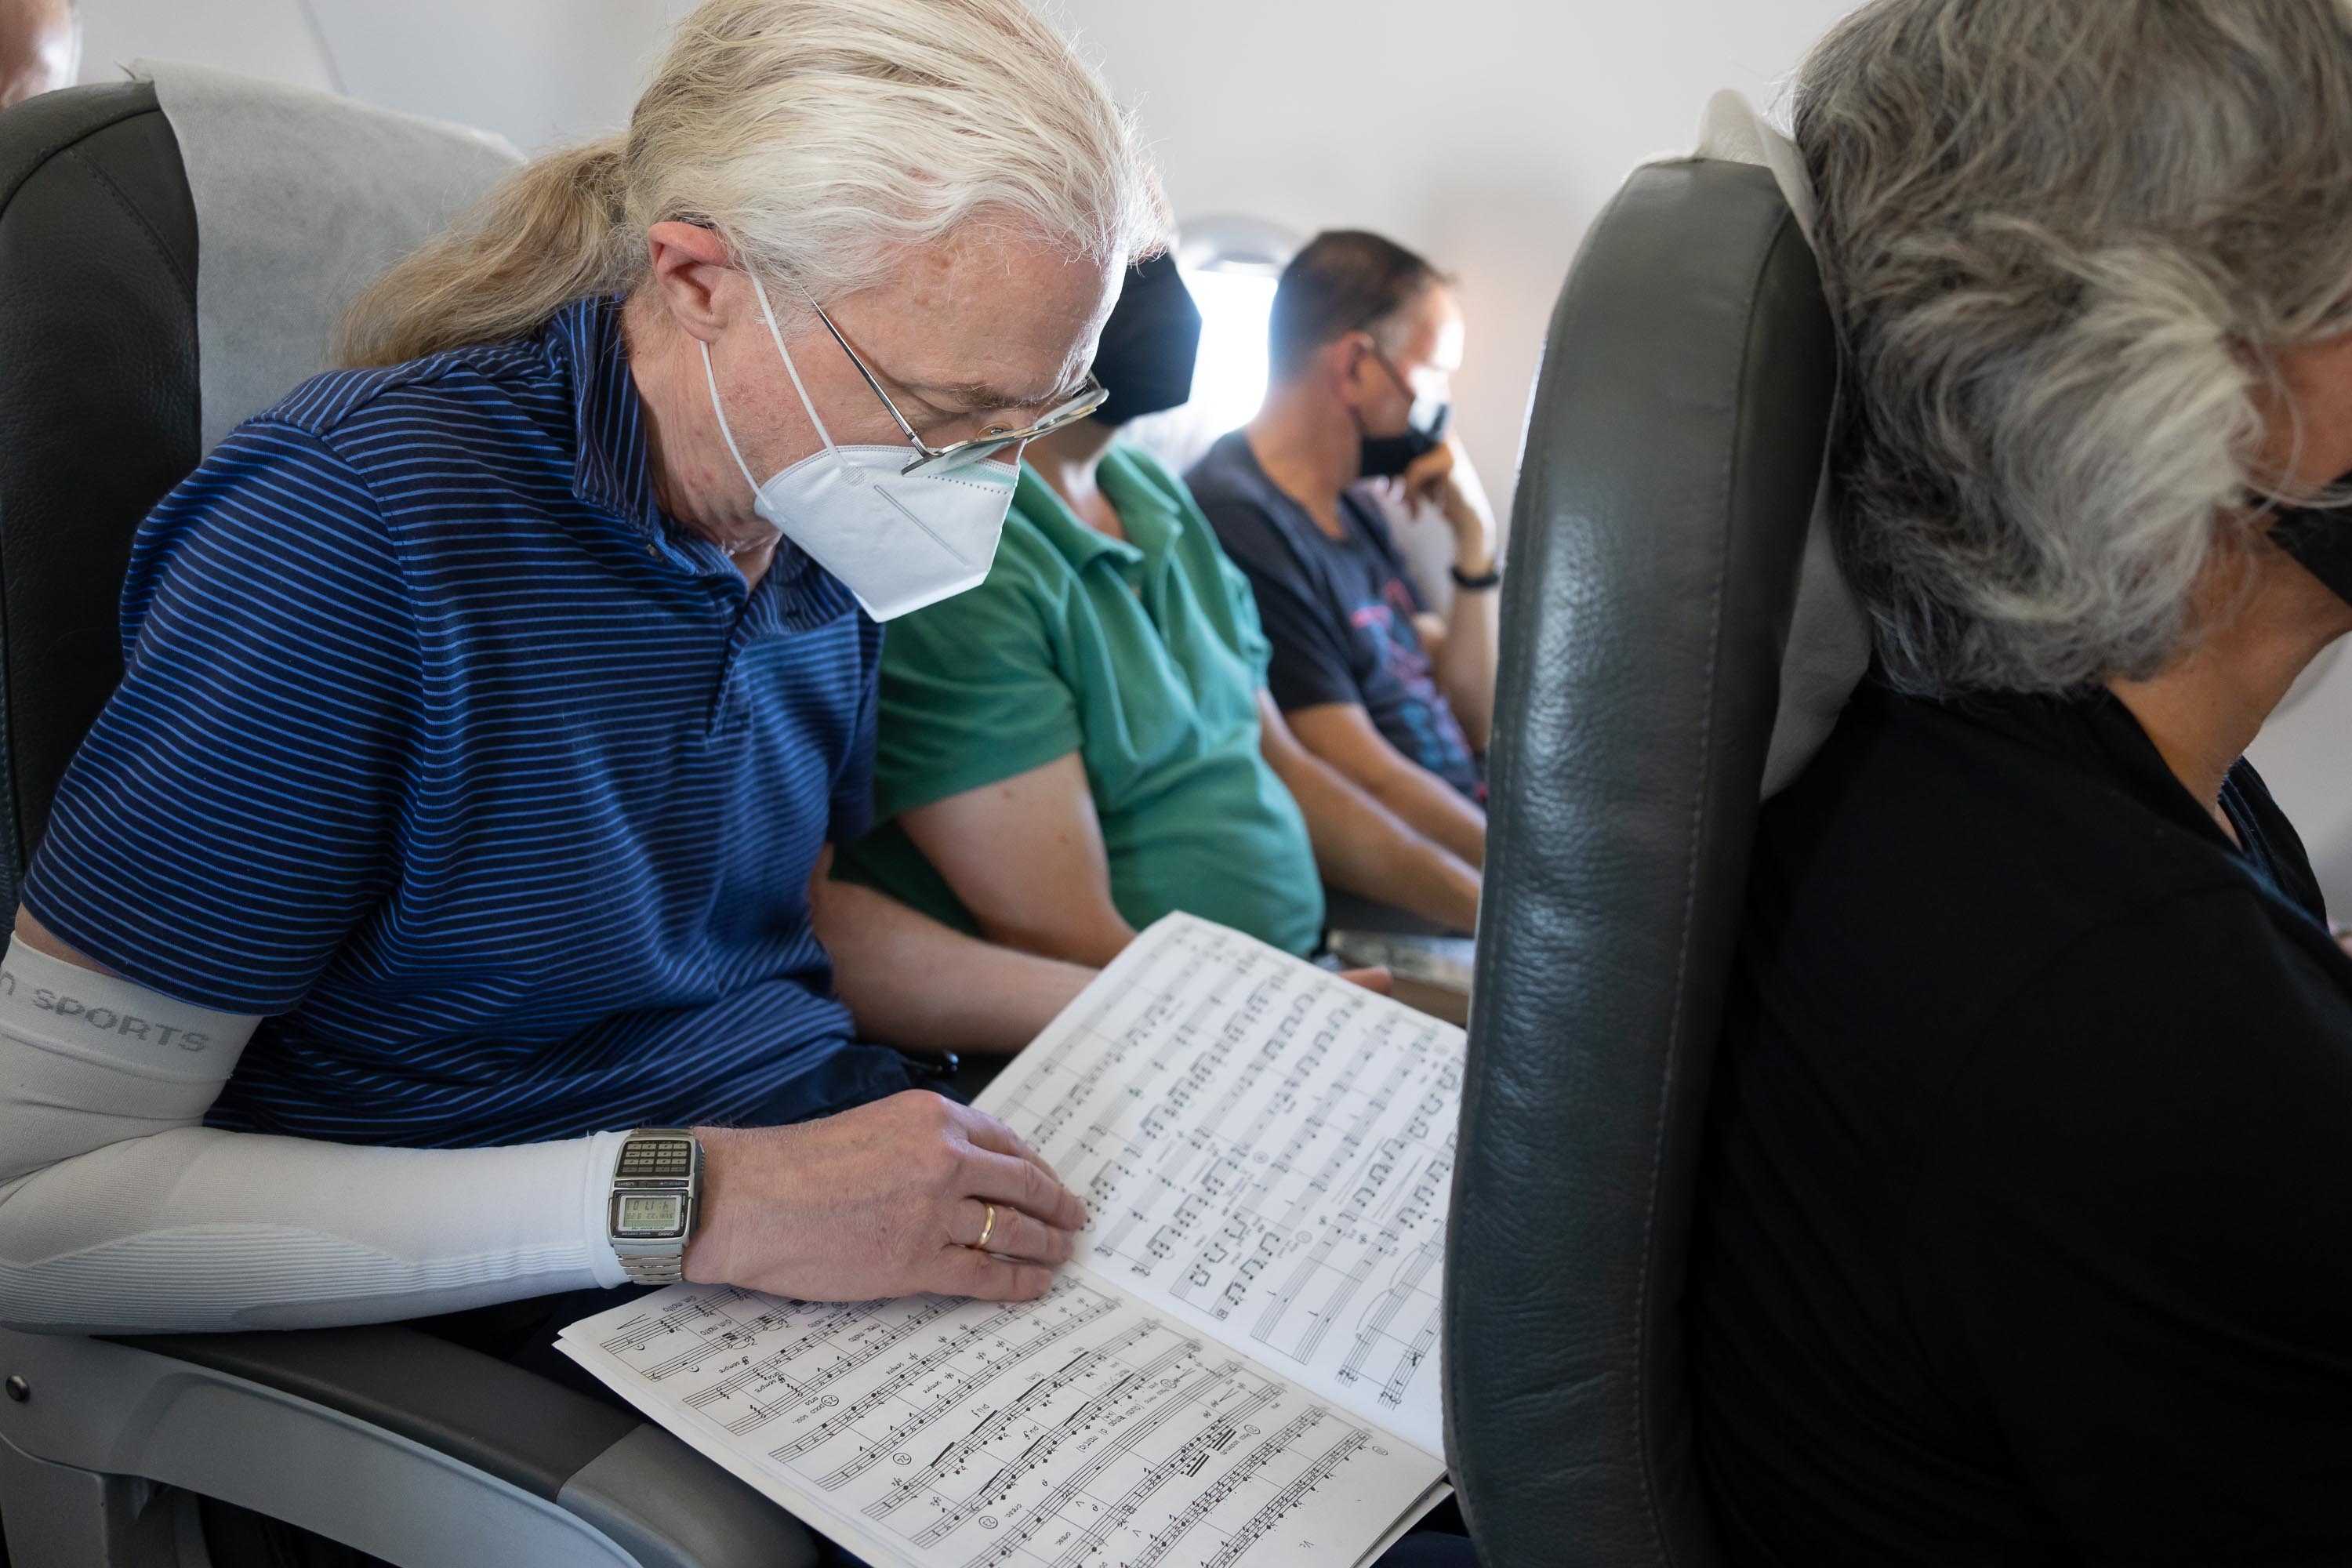 Cellist Richard Harlow makes good use of the two-hour flight to Hamburg by studying some scores